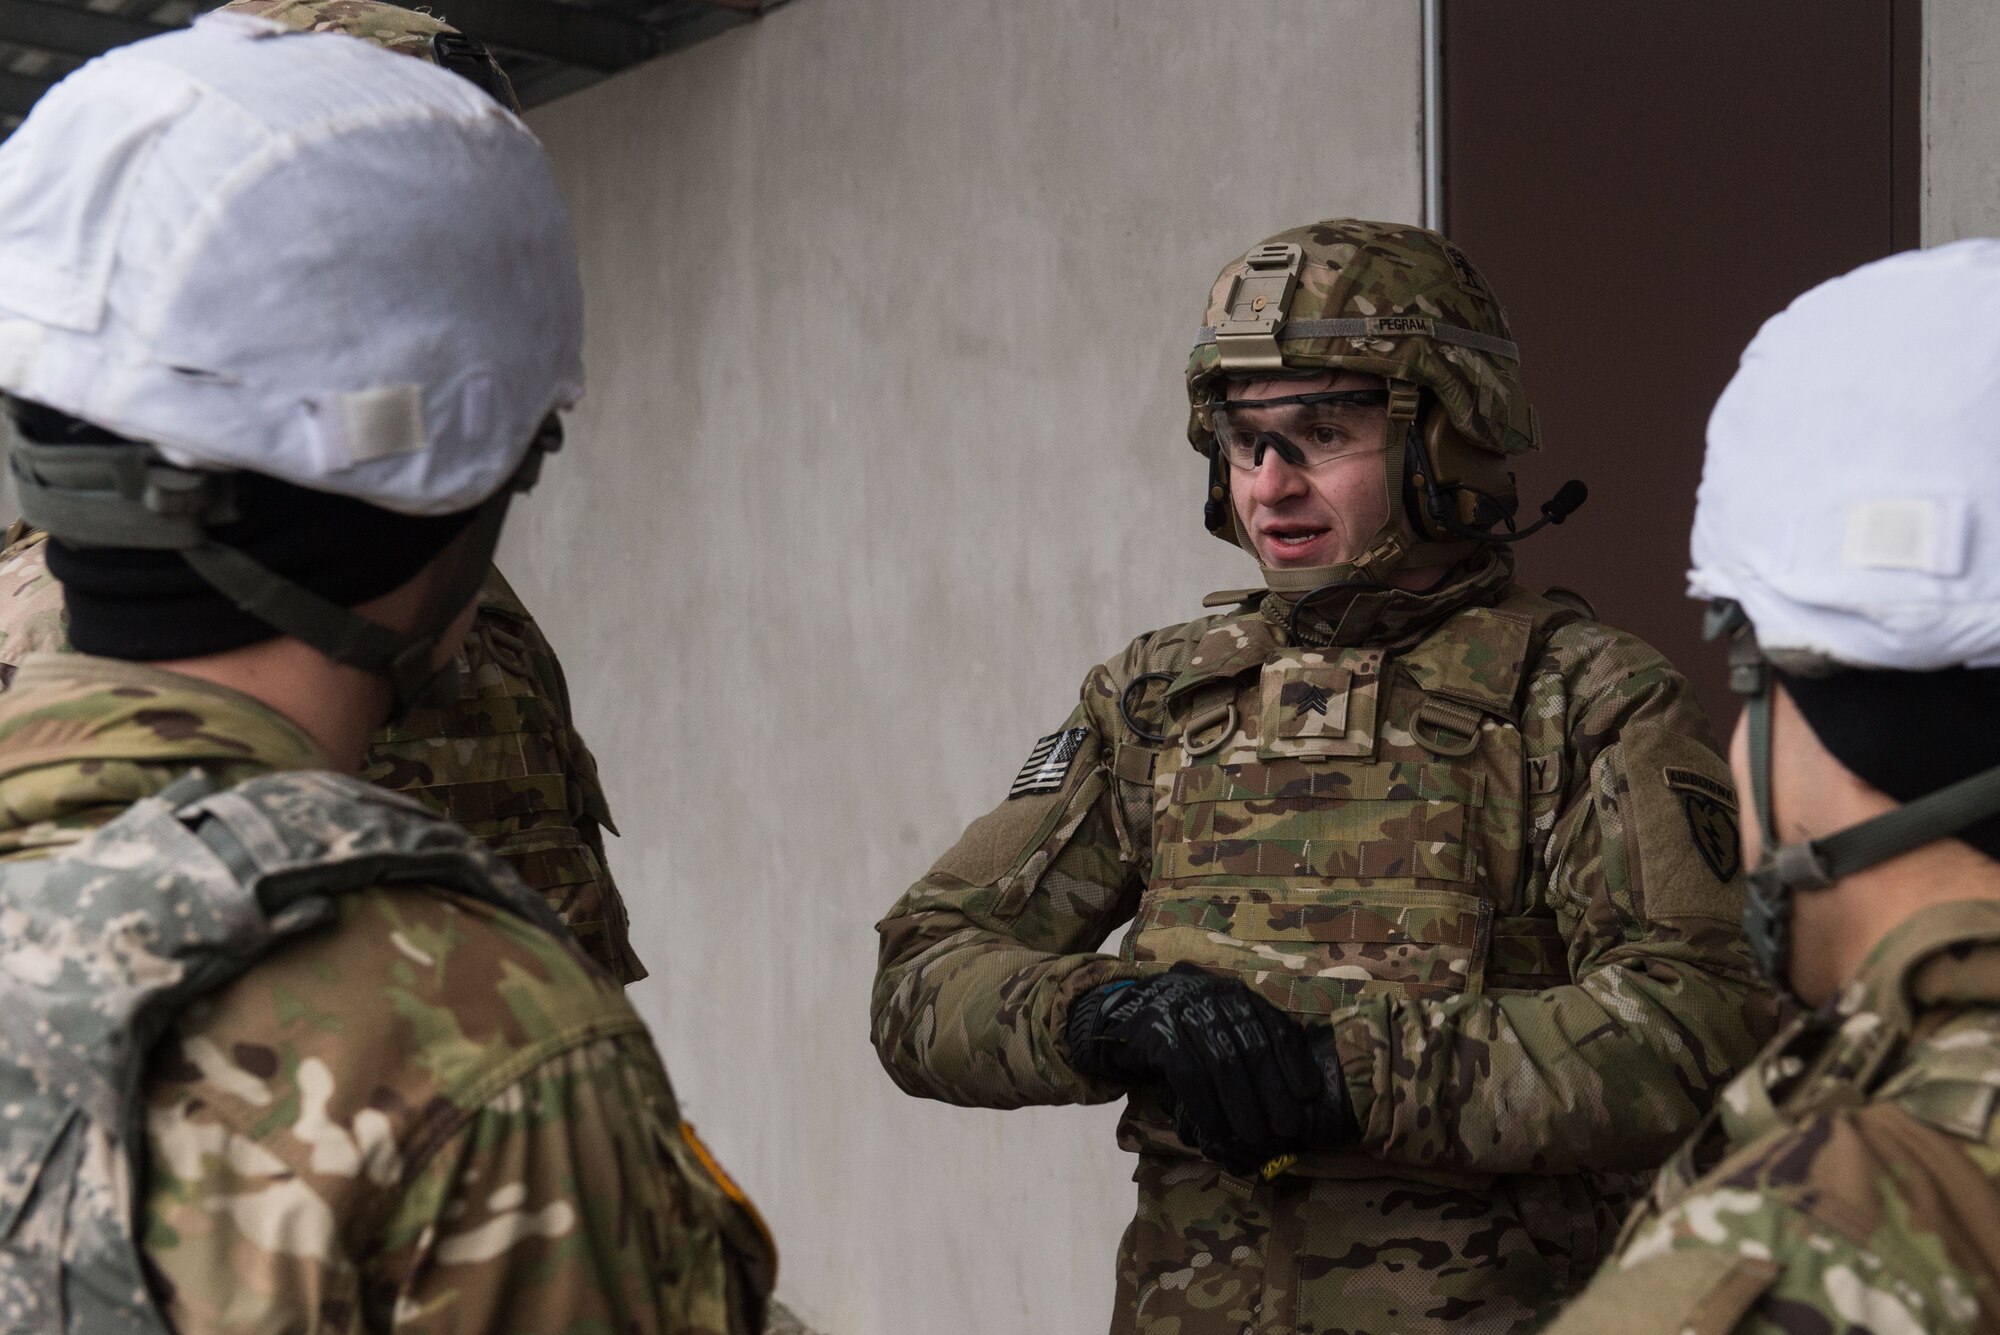 U.S. Army Sgt. Jeremy Pegram, a paratrooper assigned to Charlie Company, 3rd Battalion, 509th Parachute Infantry Regiment, 4th Infantry Brigade Combat Team (Airborne), 25th Infantry Division, U.S. Army Alaska, speaks with fellow Soldiers prior for M67 fragmentation grenade live fire training at Kraft Range on Joint Base Elmendorf-Richardson, Alaska, Dec. 12, 2017. A ‘pit’ noncommissioned officer supervised the Soldiers throwing grenades to maintain a safe instructional environment, enforce precaution standards, and direct them on proper handling of explosives. The fragmentation hand grenade has a lethal radius of five meters and can produce casualties up to 15 meters, dispersing fragments as far as 230 meters.